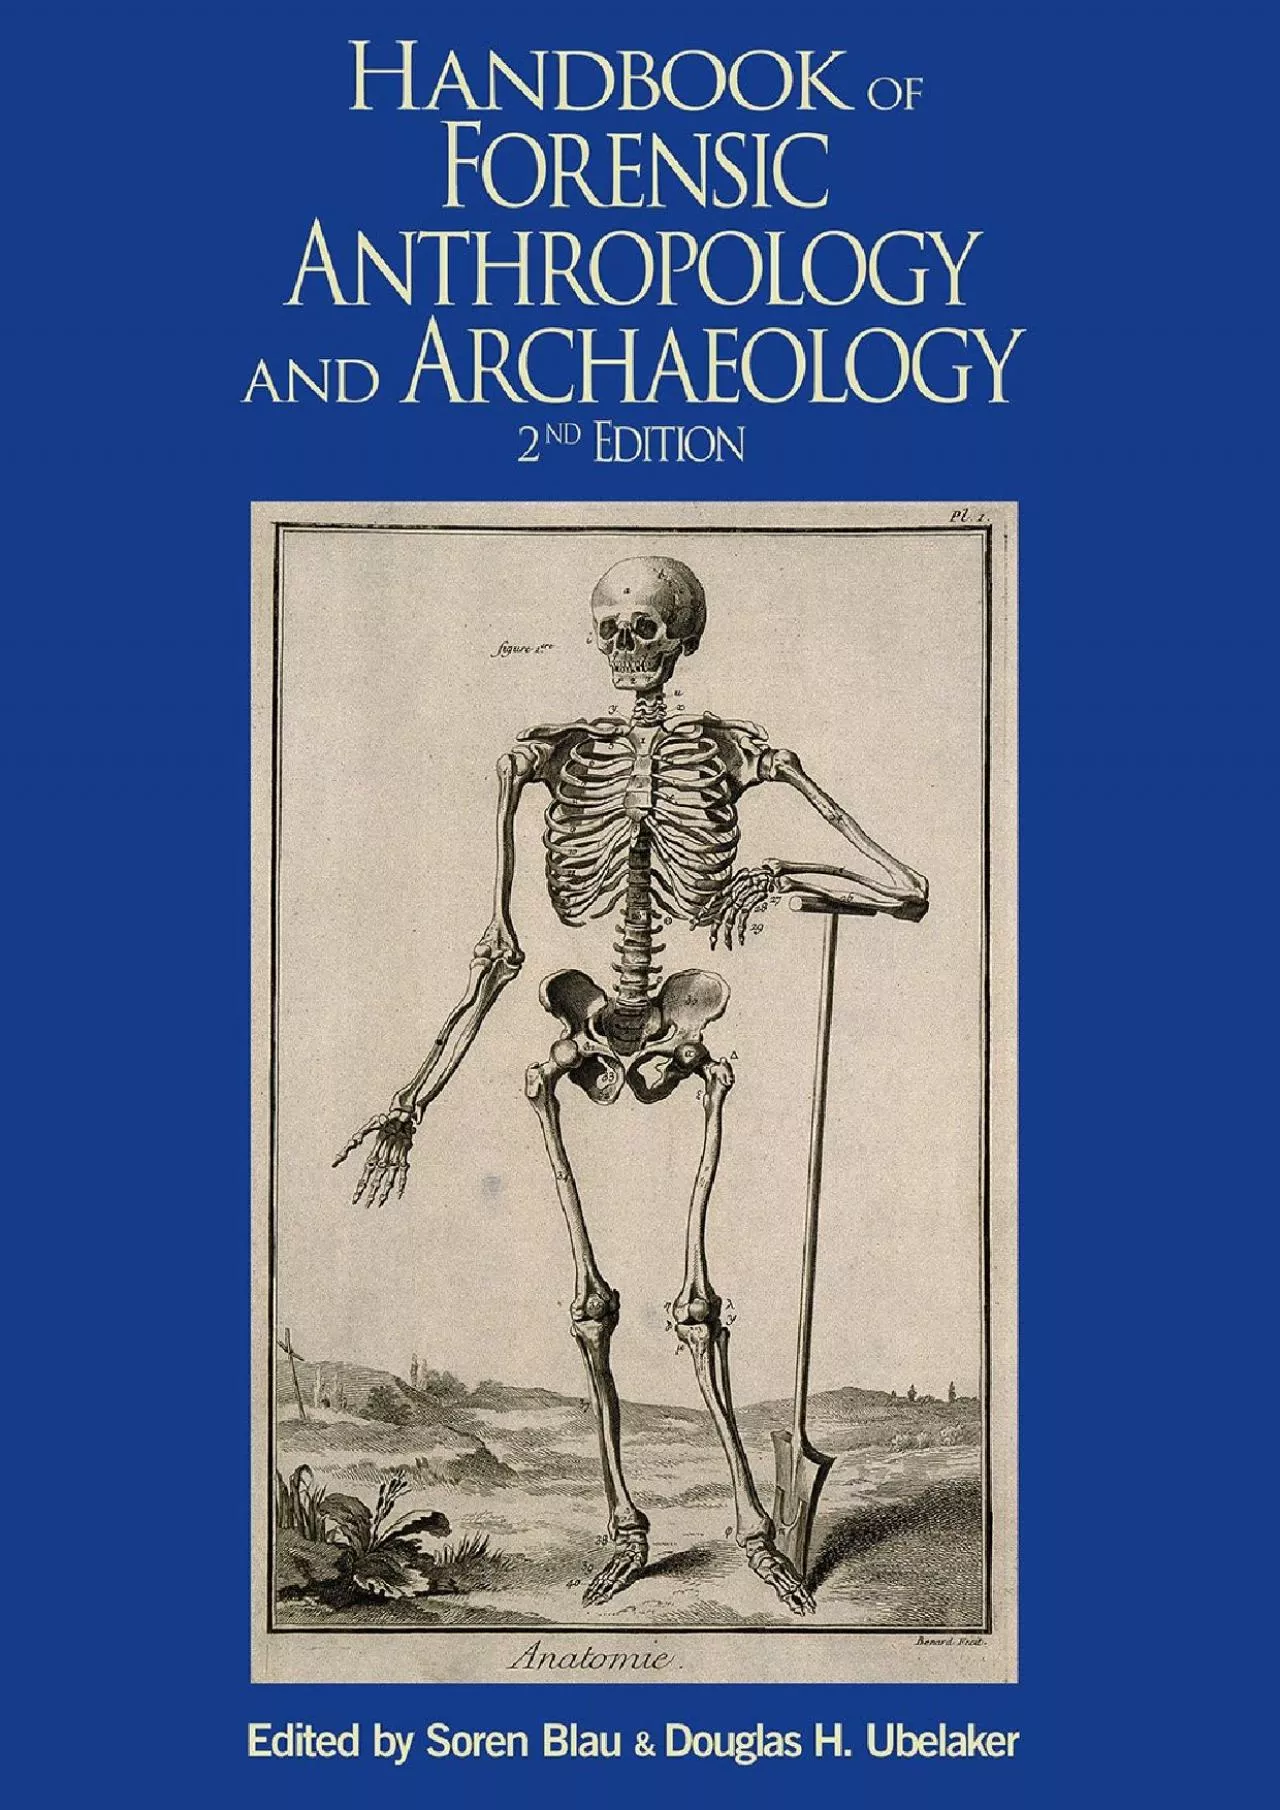 (DOWNLOAD)-Handbook of Forensic Anthropology and Archaeology (WAC Research Handbooks in